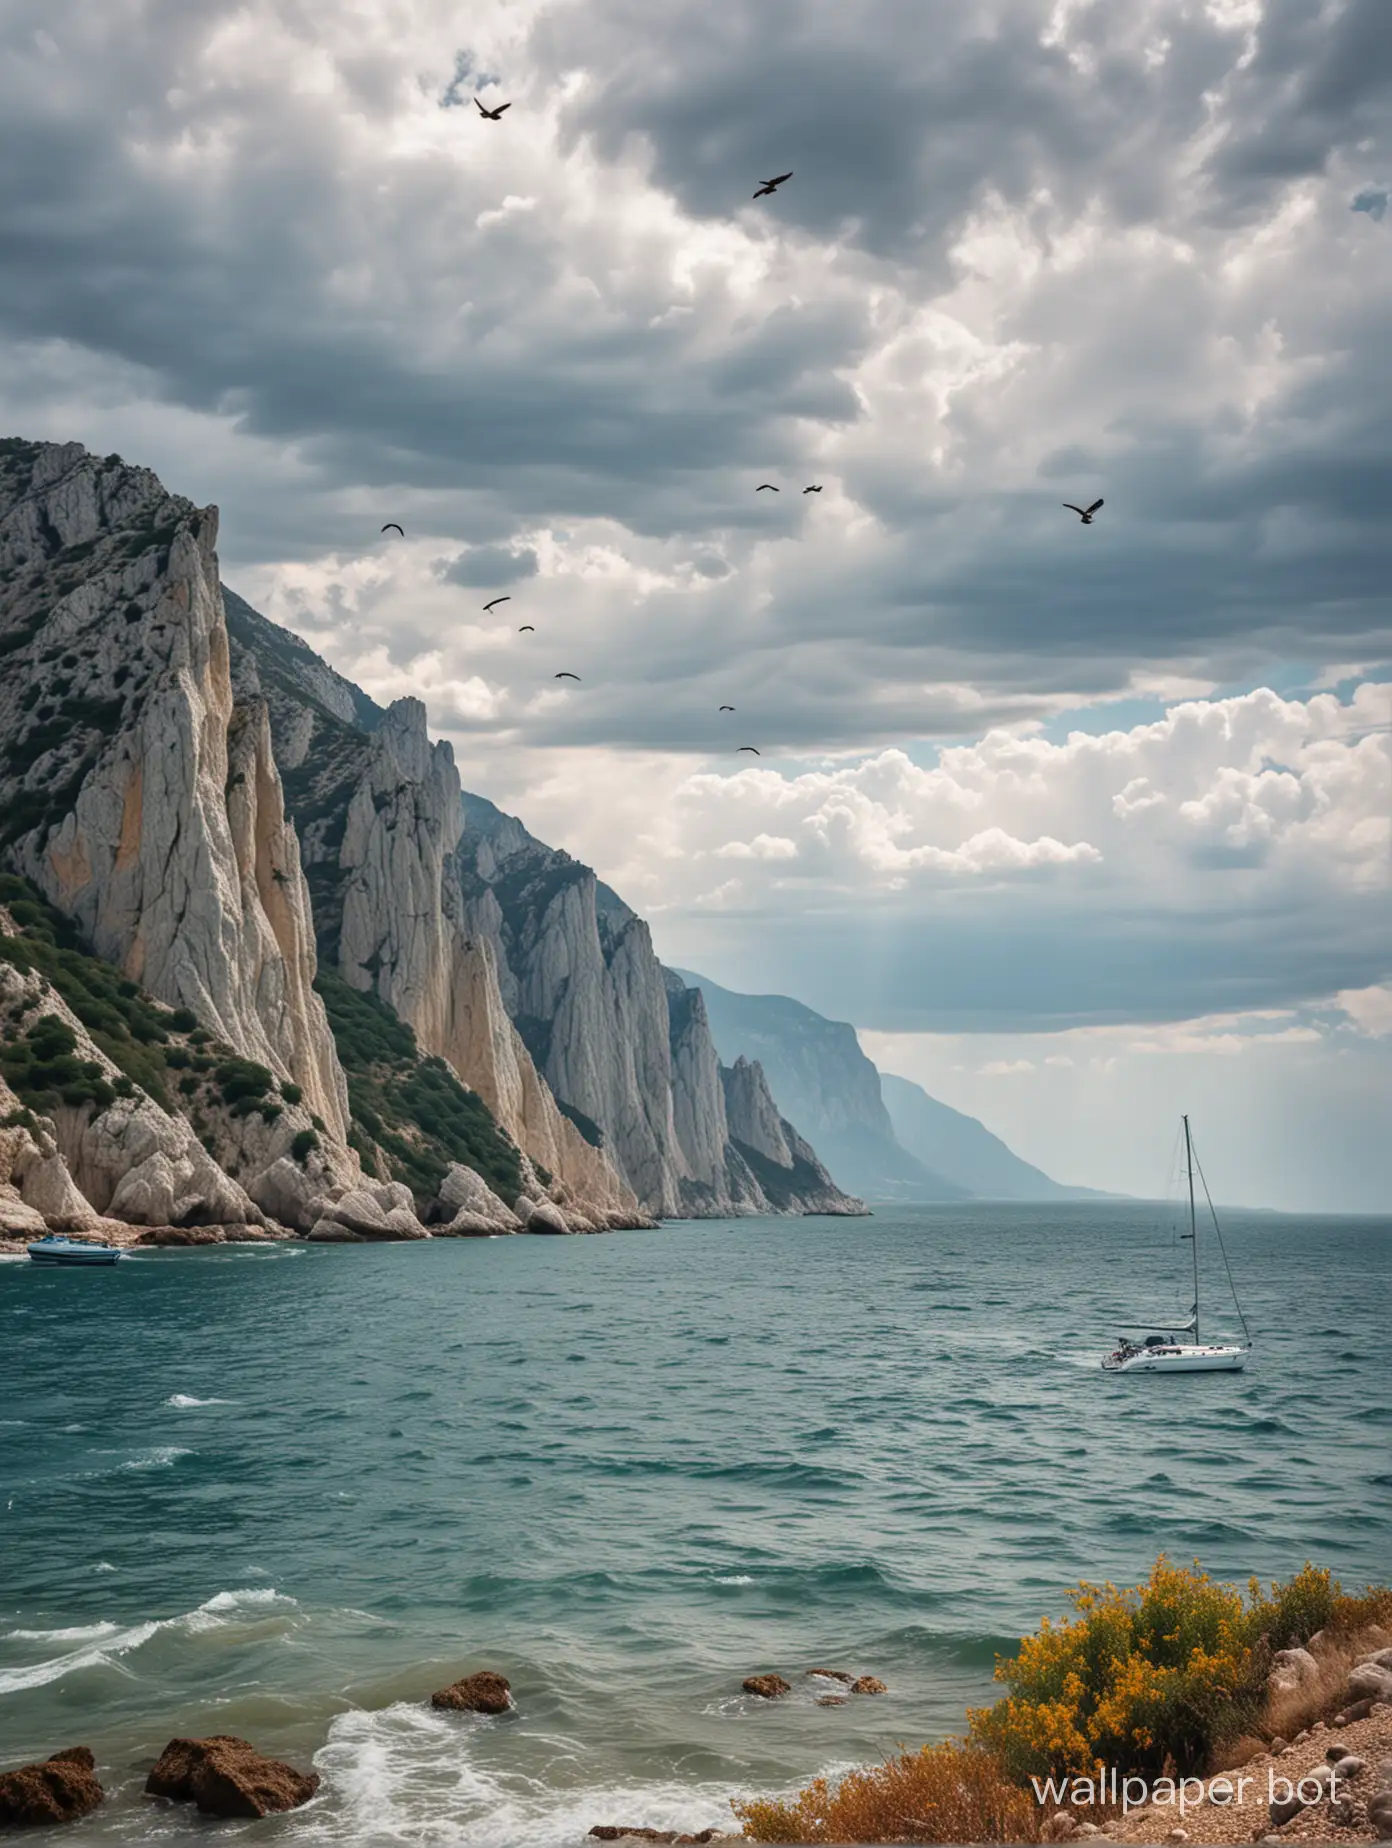 Seaside-Scenery-with-Crimean-Mountains-Yacht-and-Birds